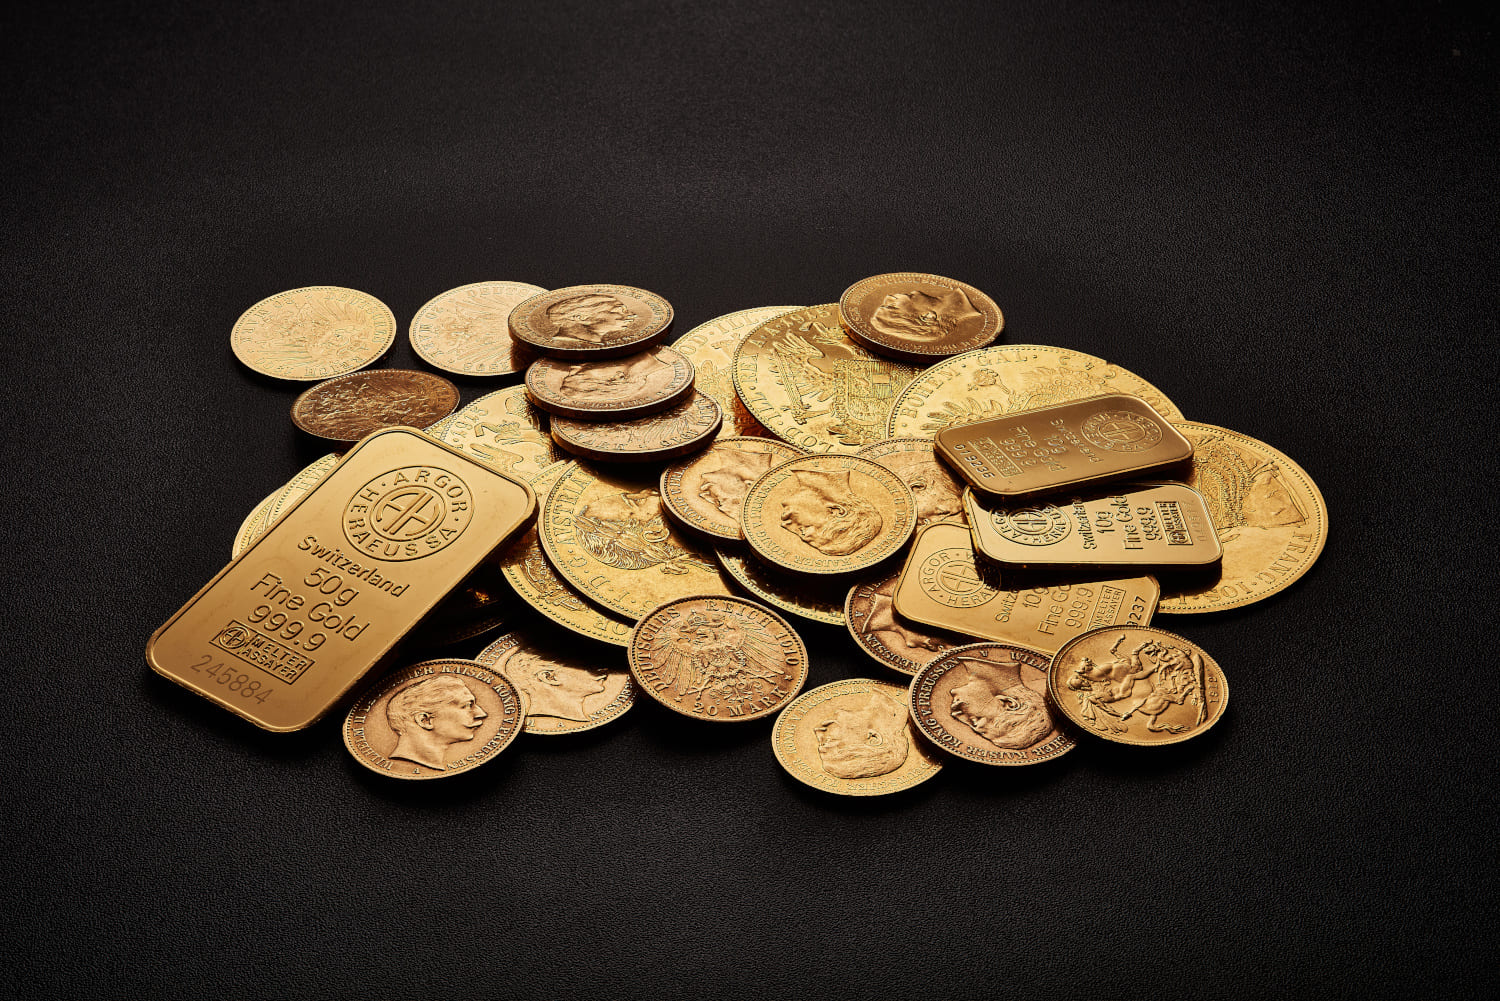 various gold coins and bars on a black background